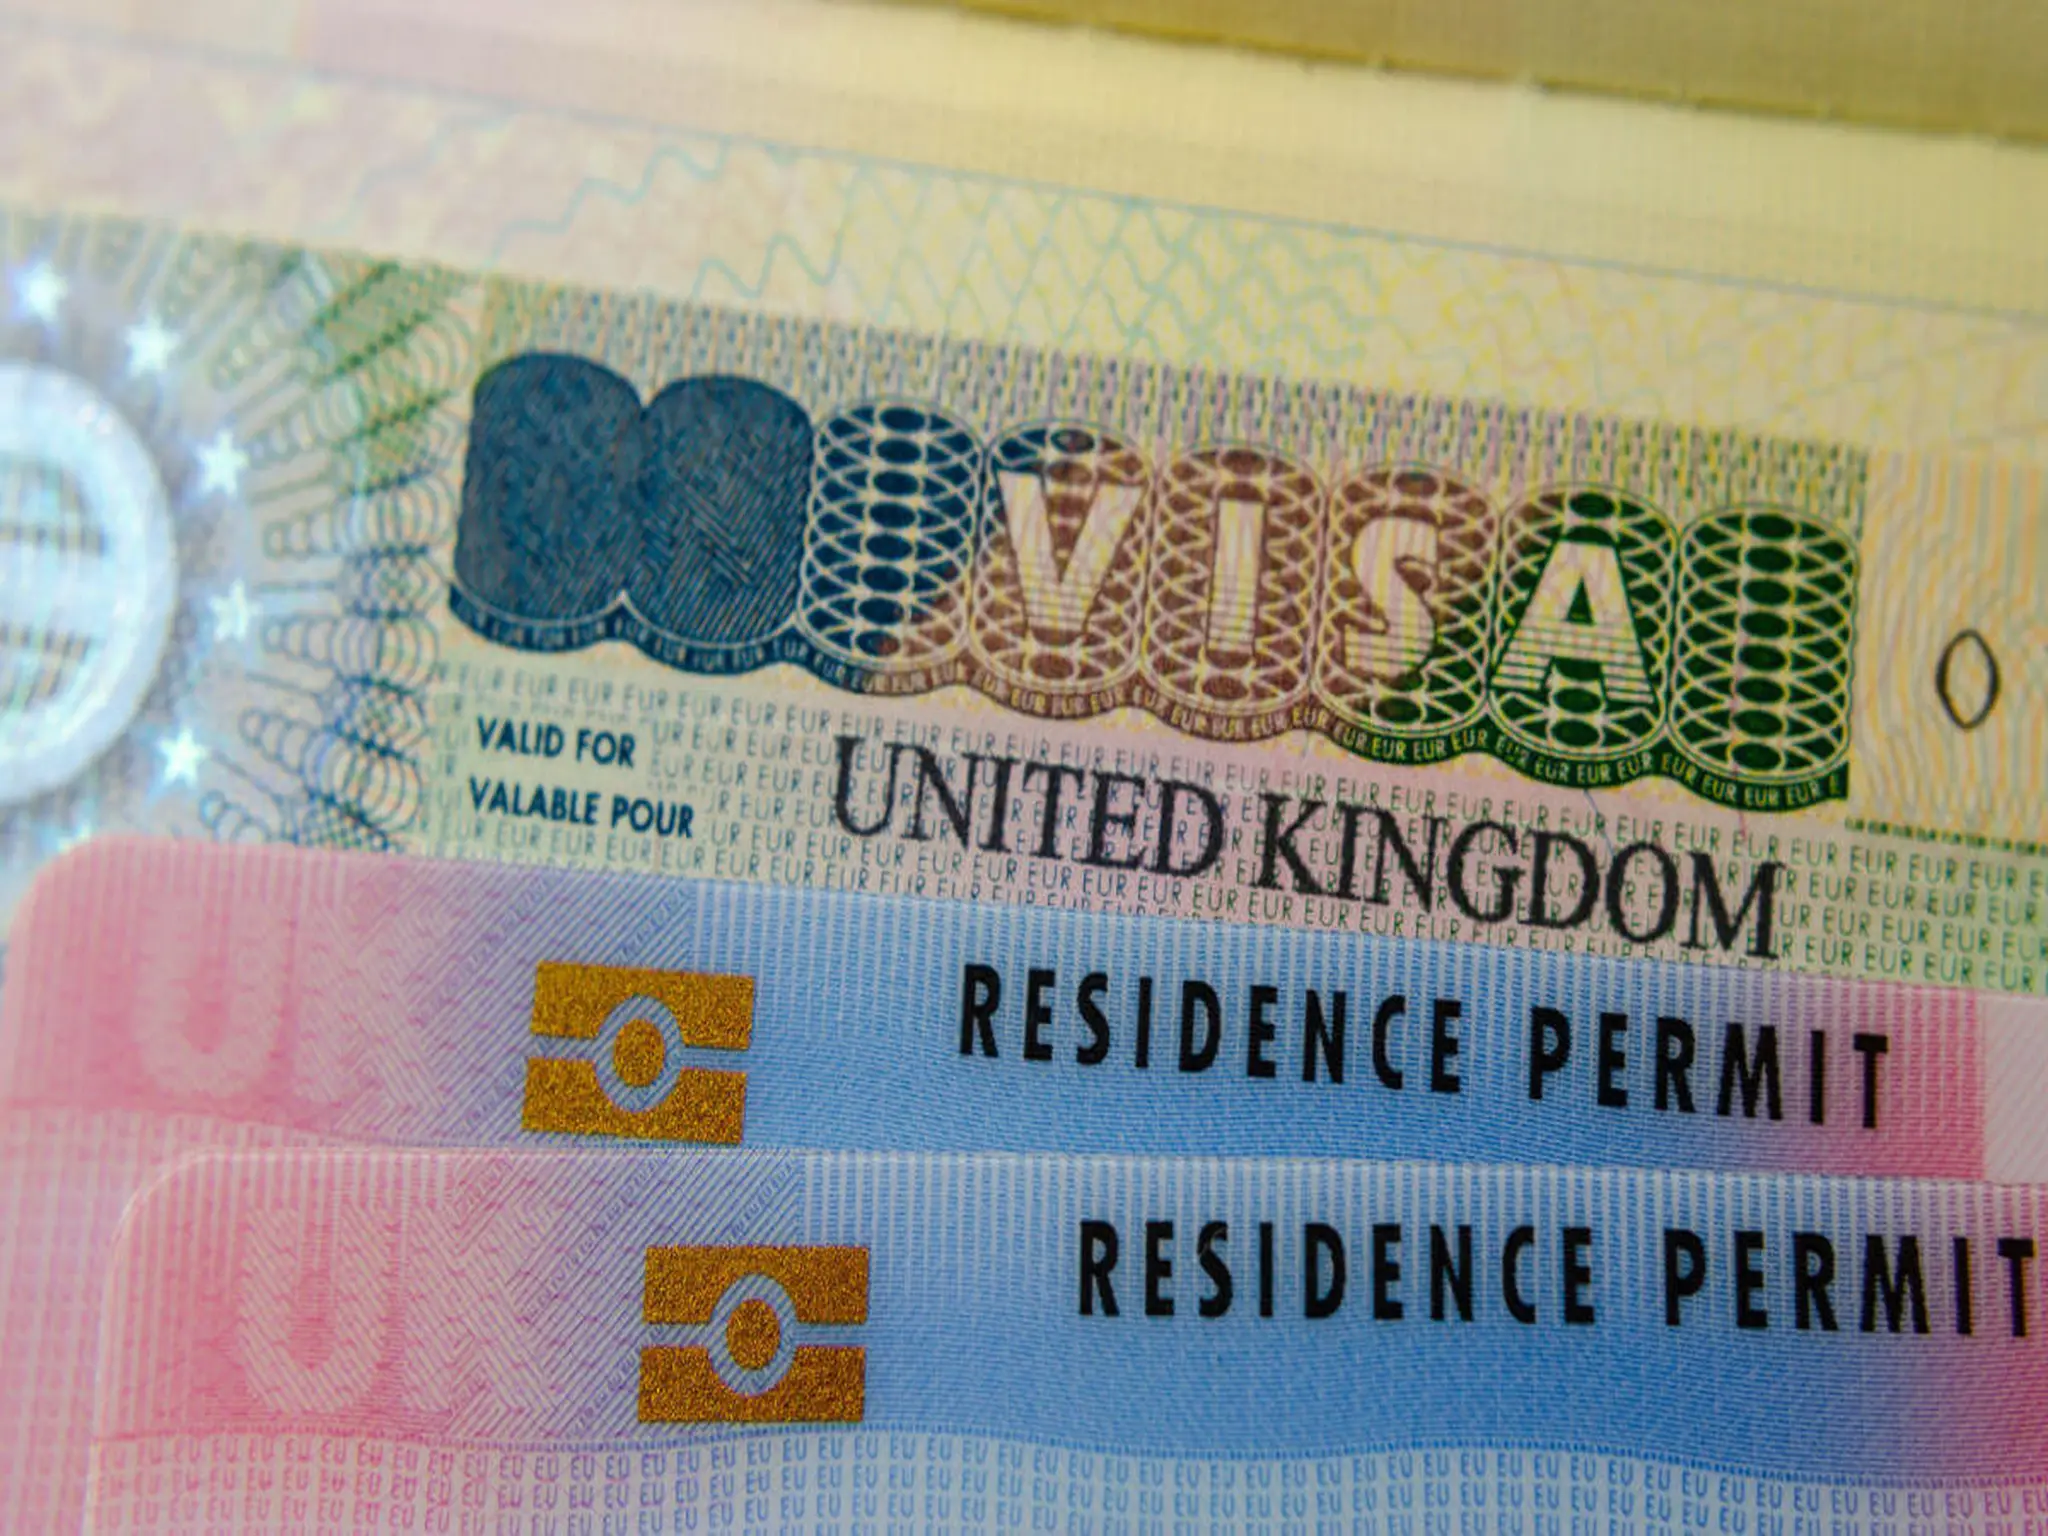 The UK issues a new permit allowing travel an unlimited number of times for two years